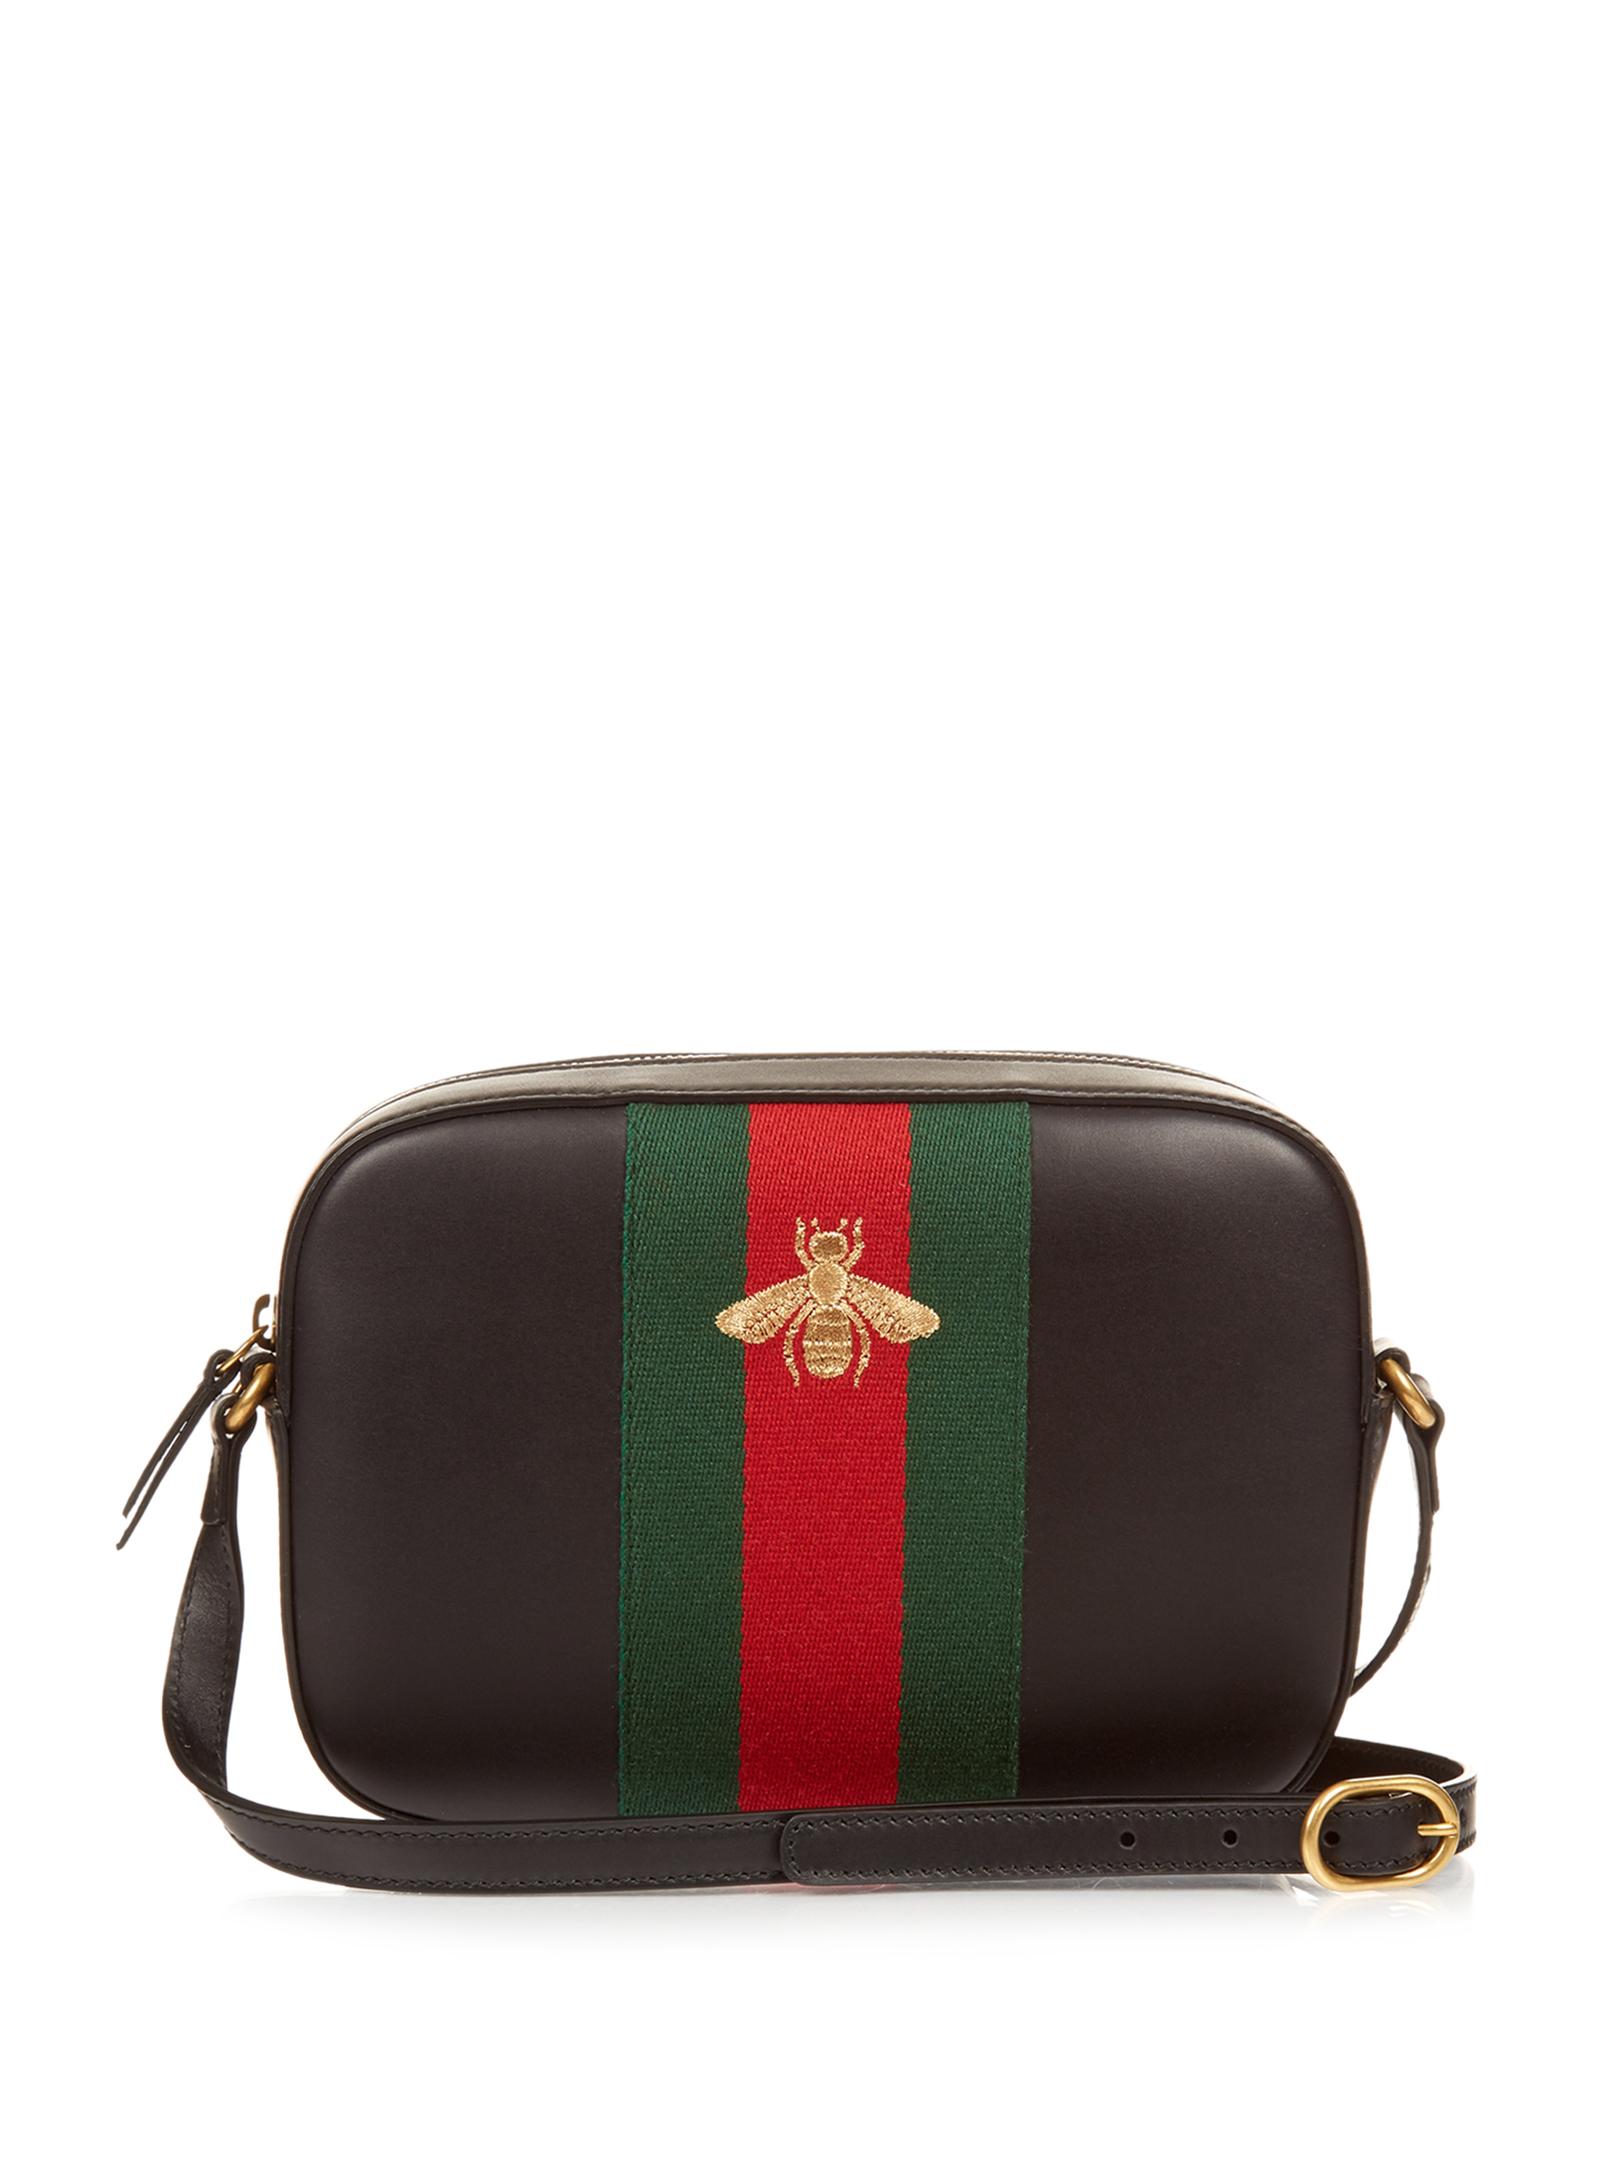 Gucci Bee-embroidered Leather Cross-body Bag in Black | Lyst UK